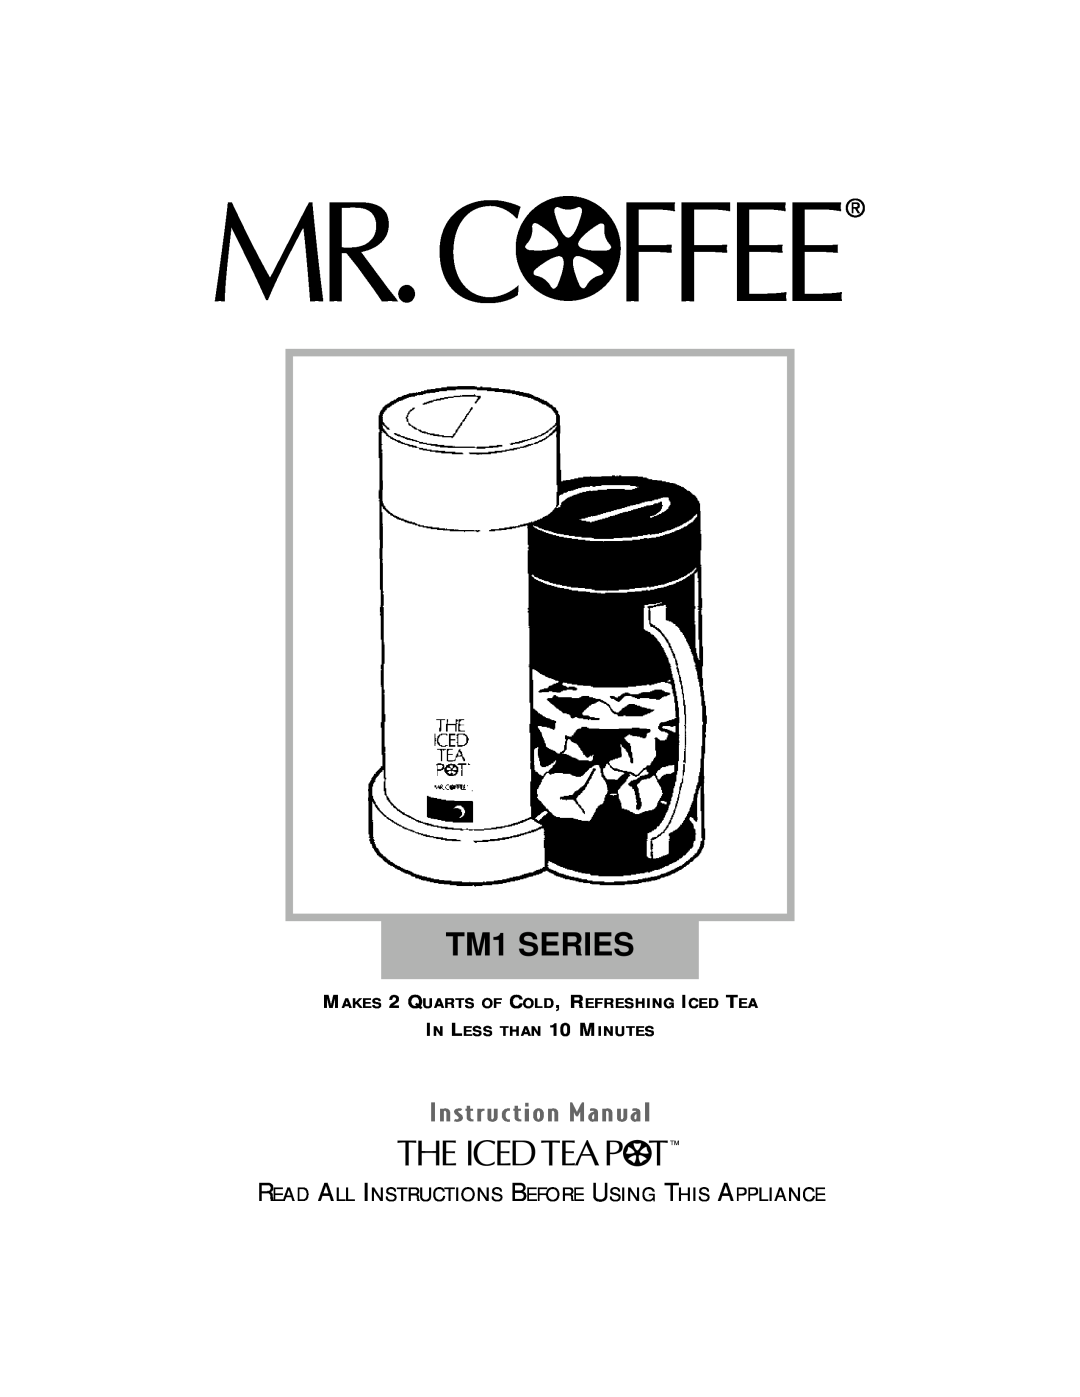 Mr. Coffee instruction manual TM1 SERIES, Read All Instructions Before Using This Appliance, IN LESS THAN 10 MINUTES 